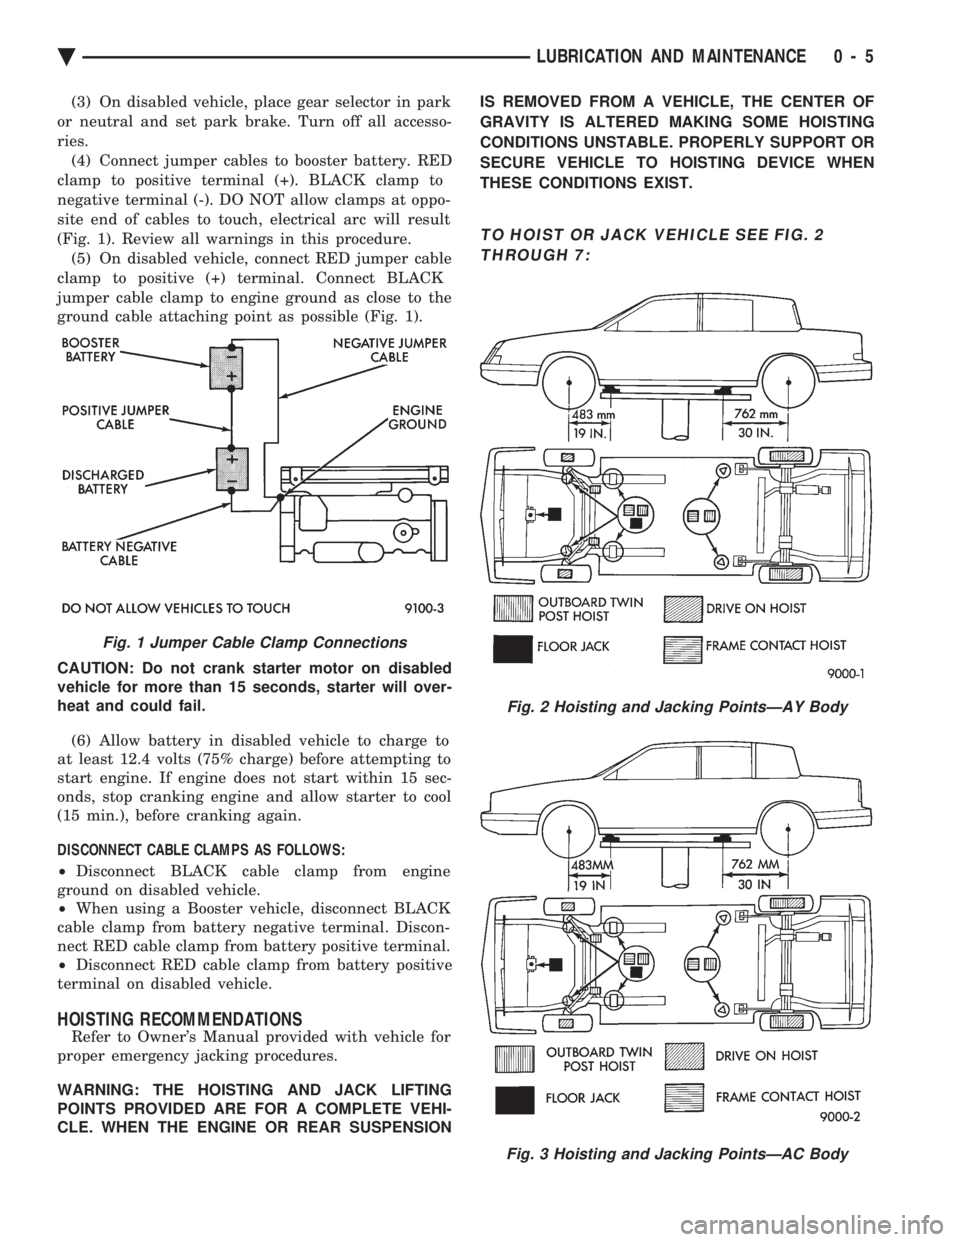 CHEVROLET PLYMOUTH ACCLAIM 1993  Service Manual (3) On disabled vehicle, place gear selector in park 
or neutral and set park brake. Turn off all accesso-
ries. (4) Connect jumper cables to booster battery. RED
clamp to positive terminal (+). BLACK